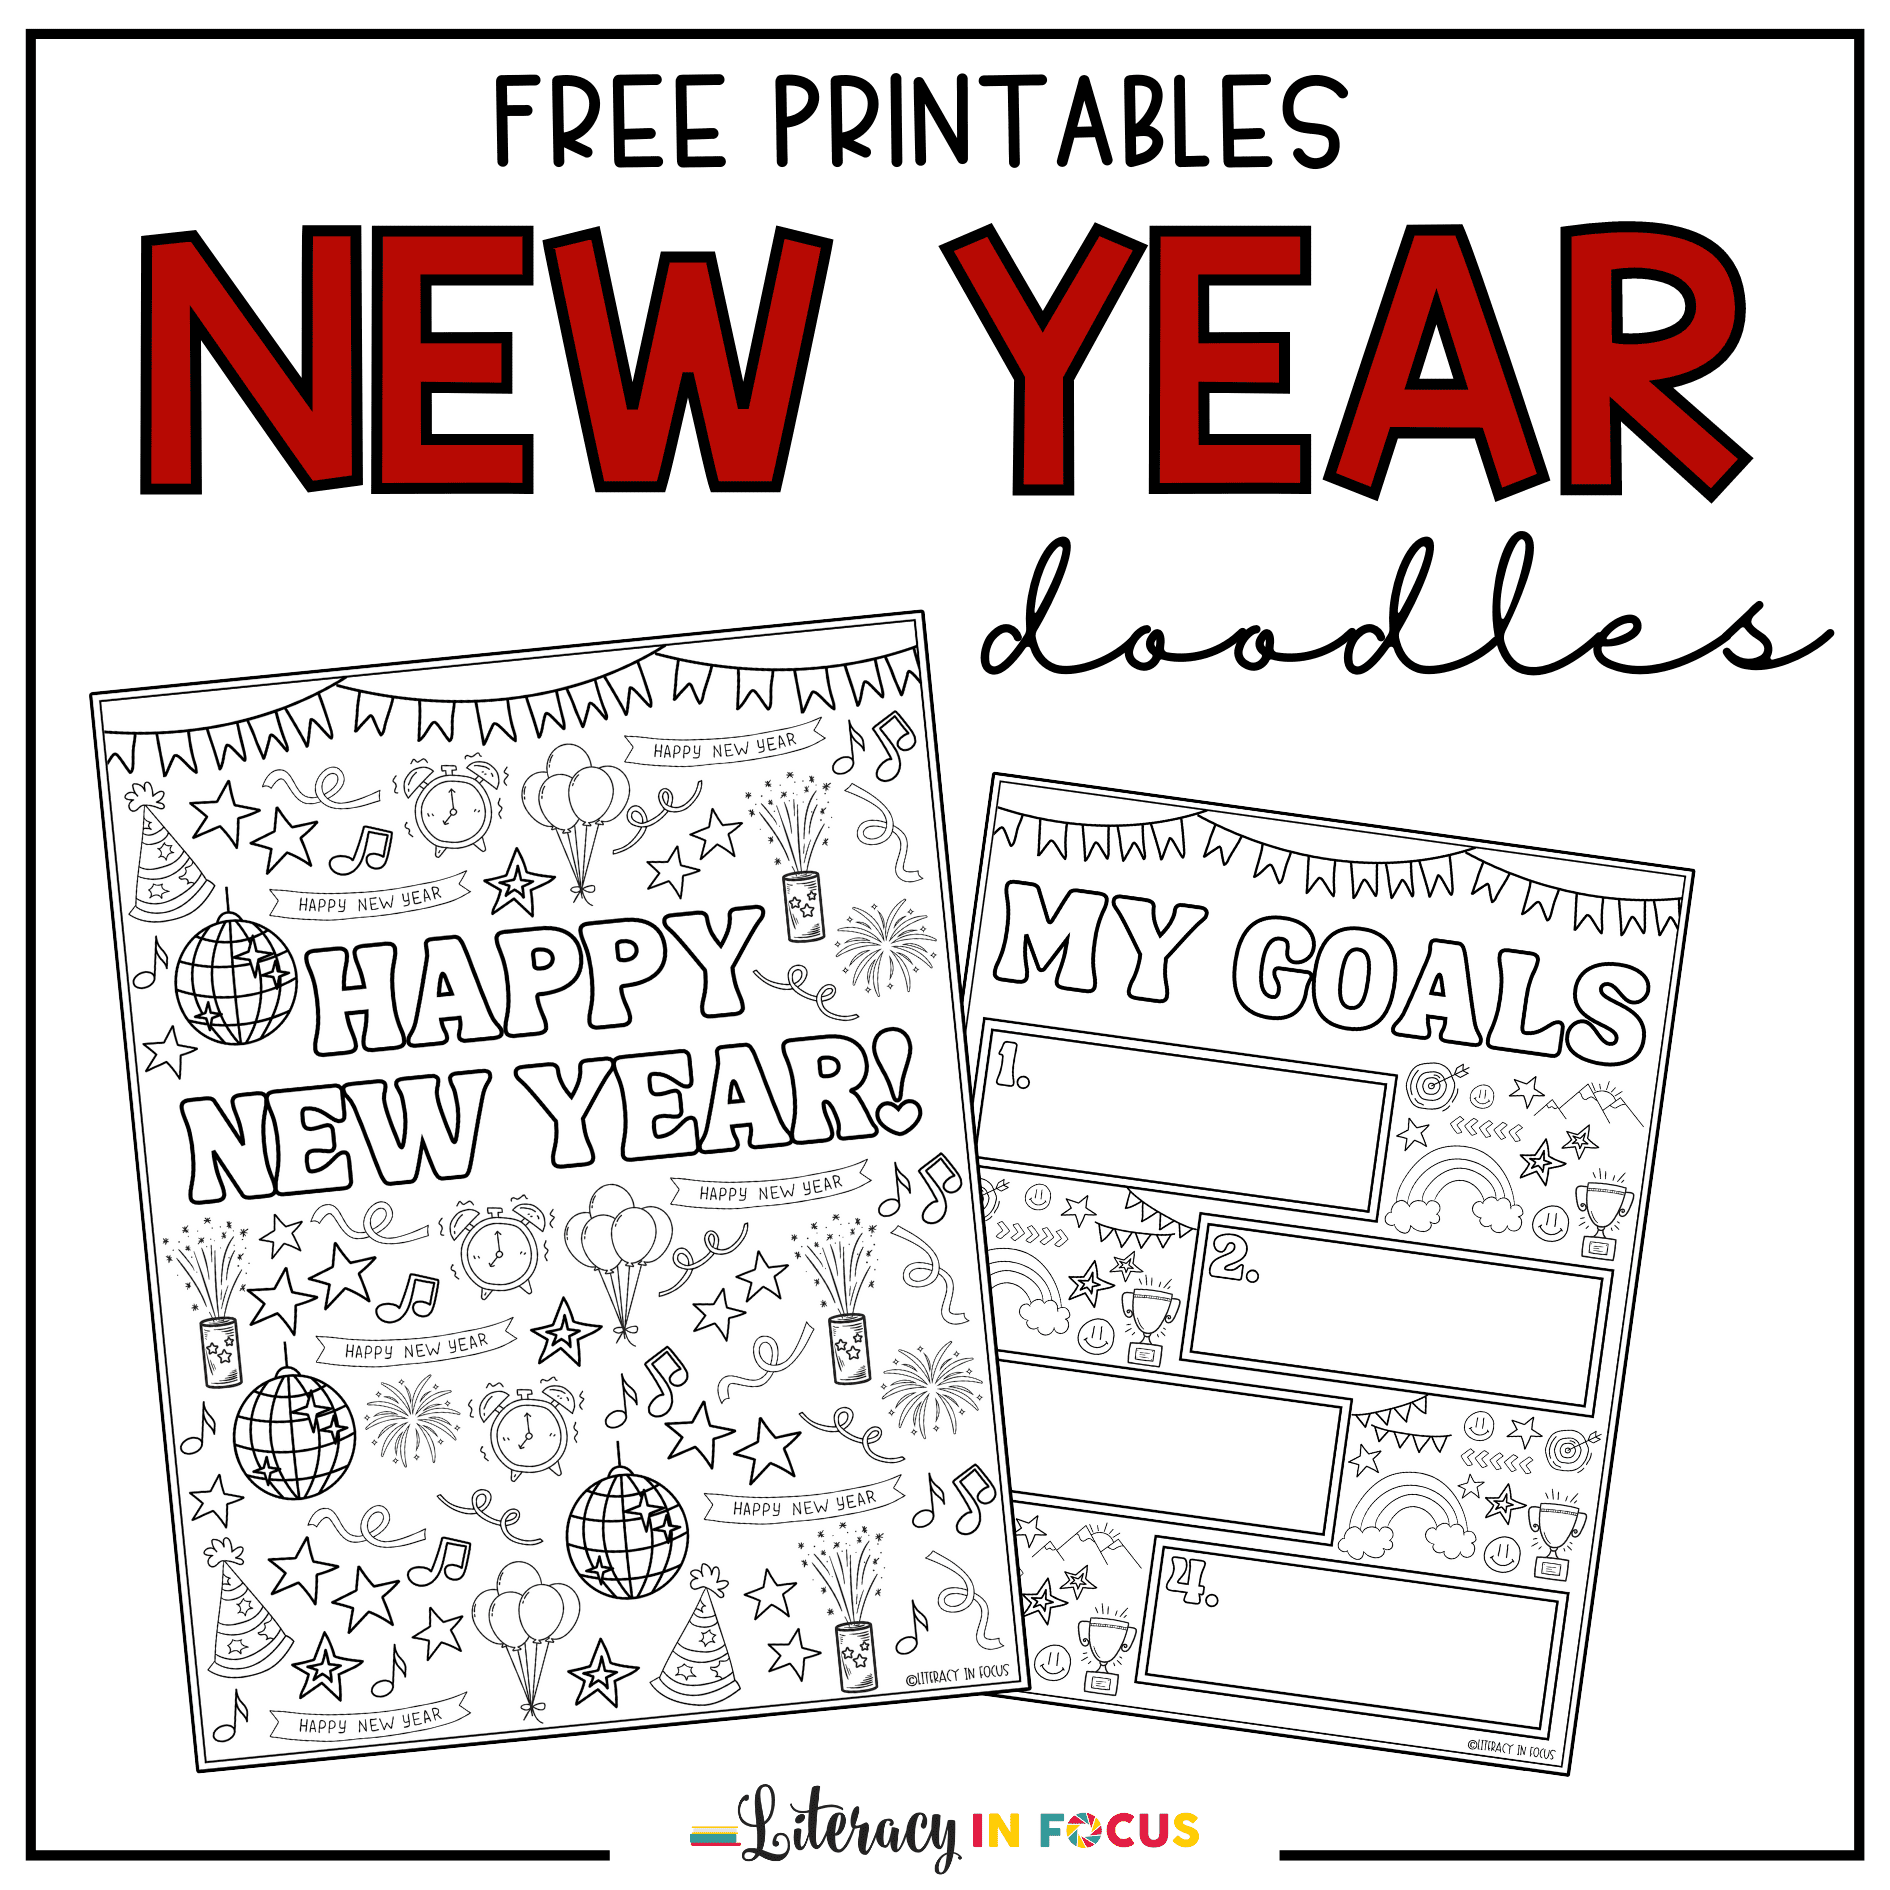 Free New Year's Coloring Pages Printables